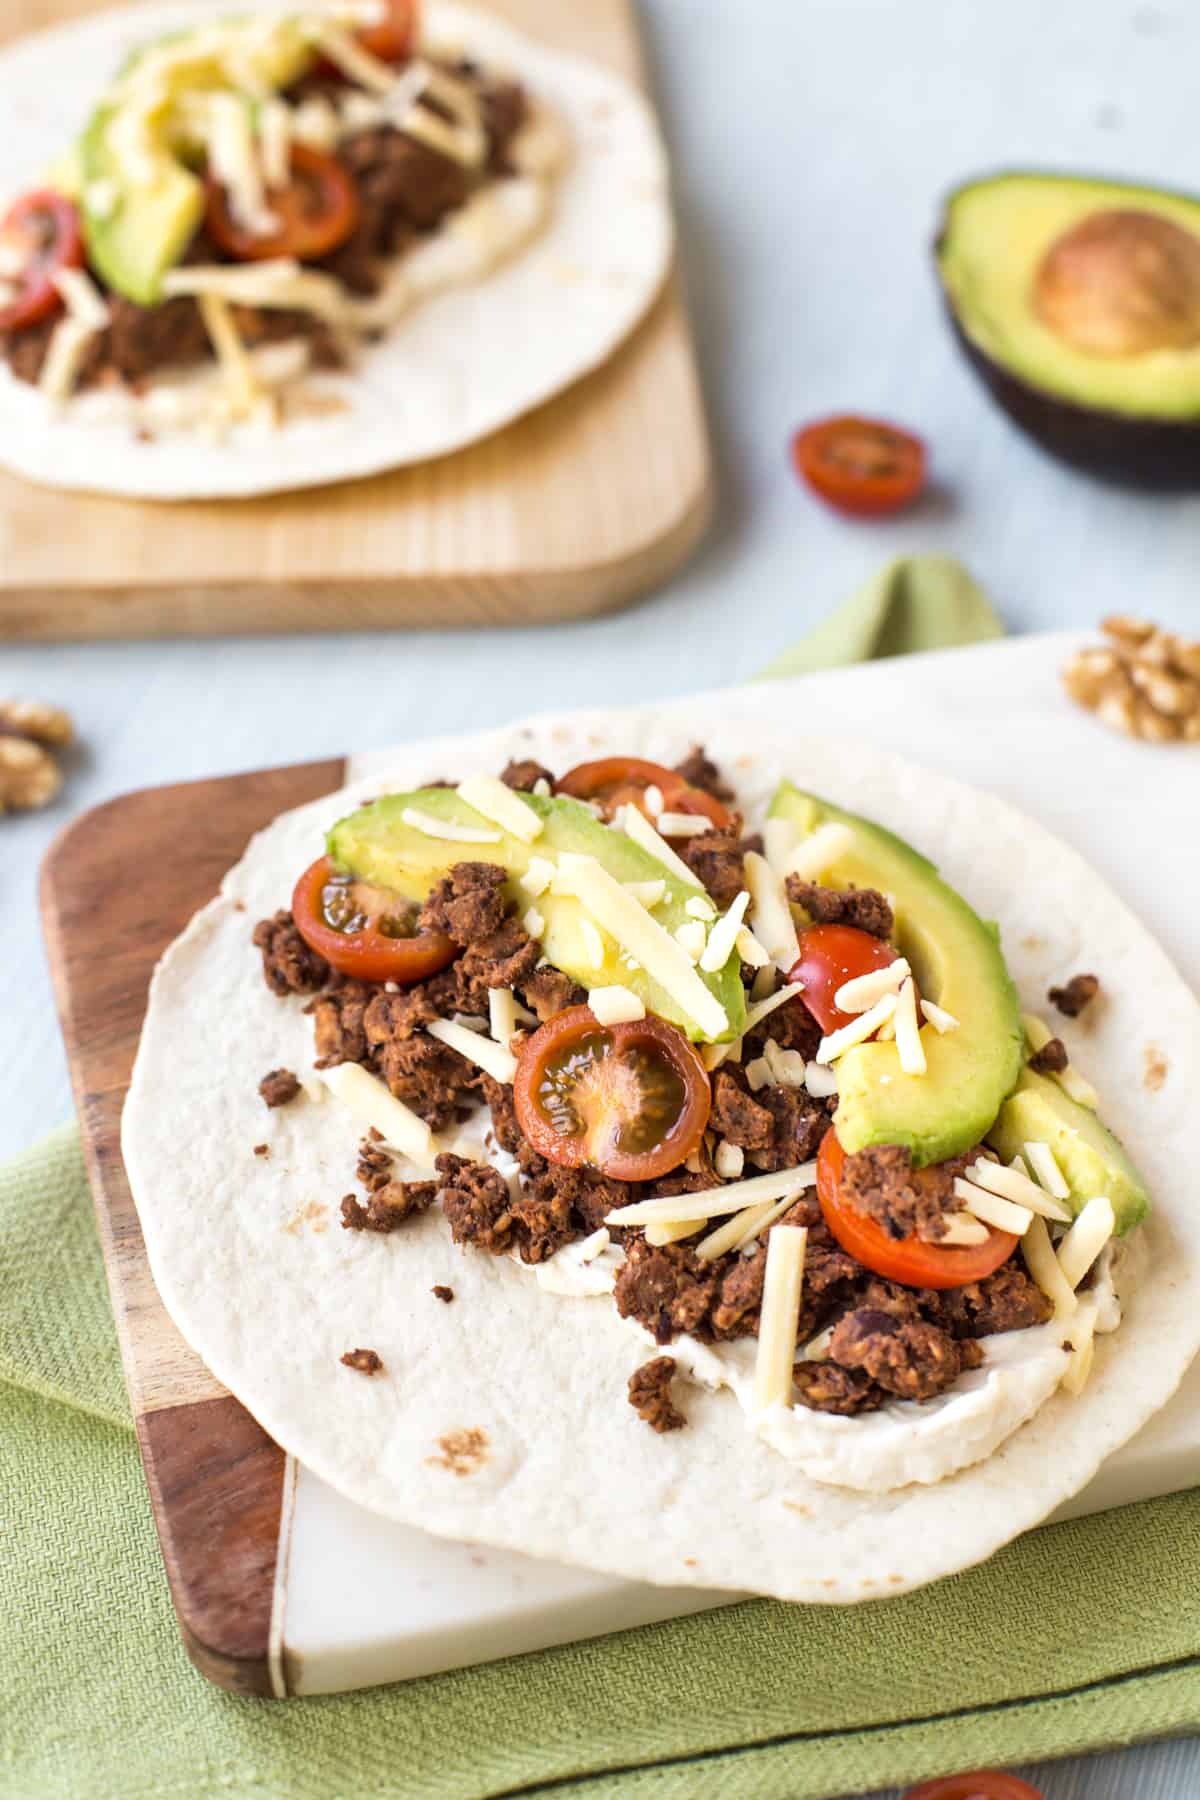 A veggie taco with black bean and walnut taco meat, avocado and tomatoes.